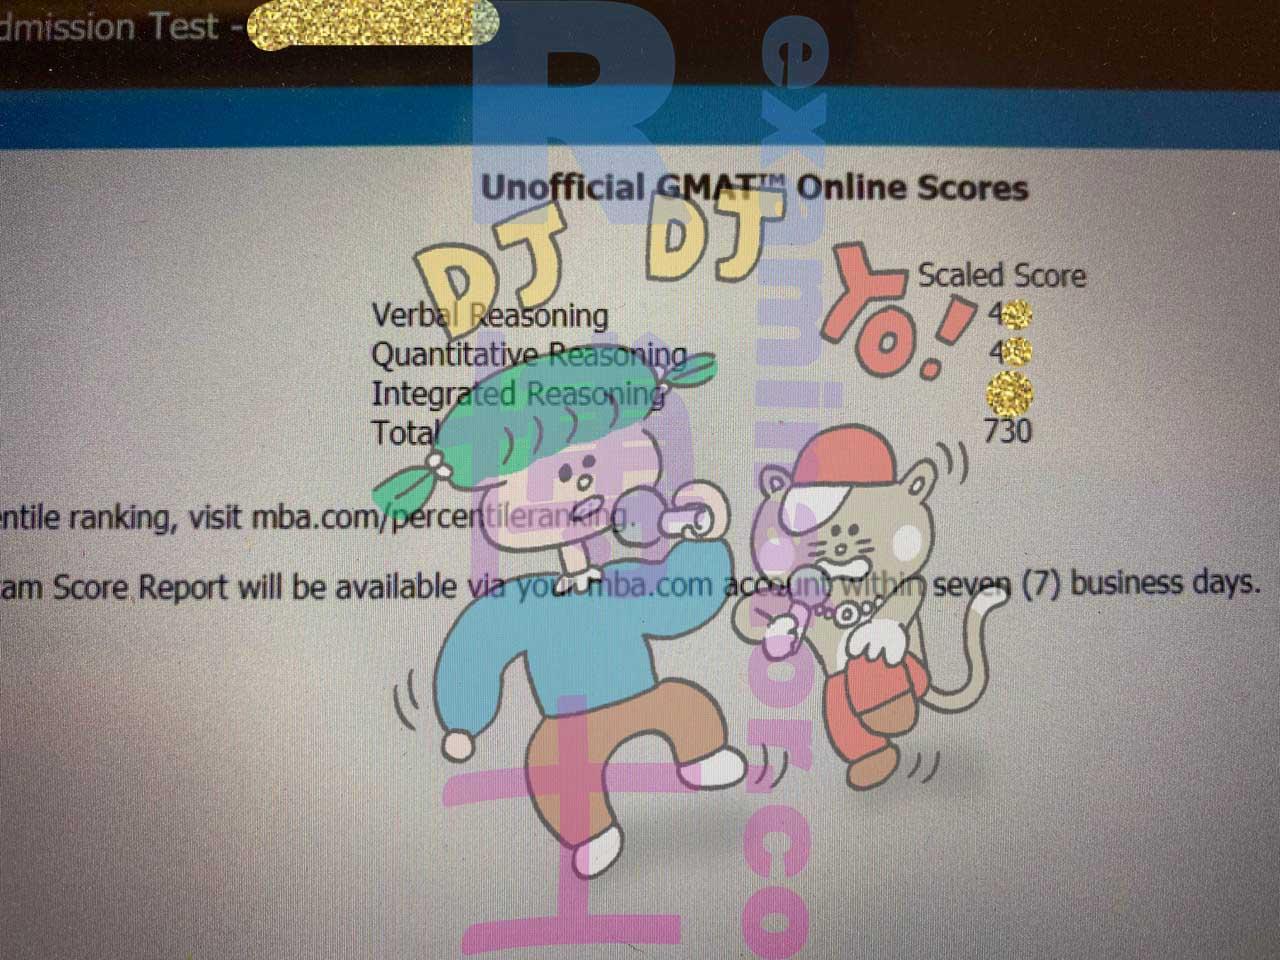 score image for GMAT Cheating success story #259